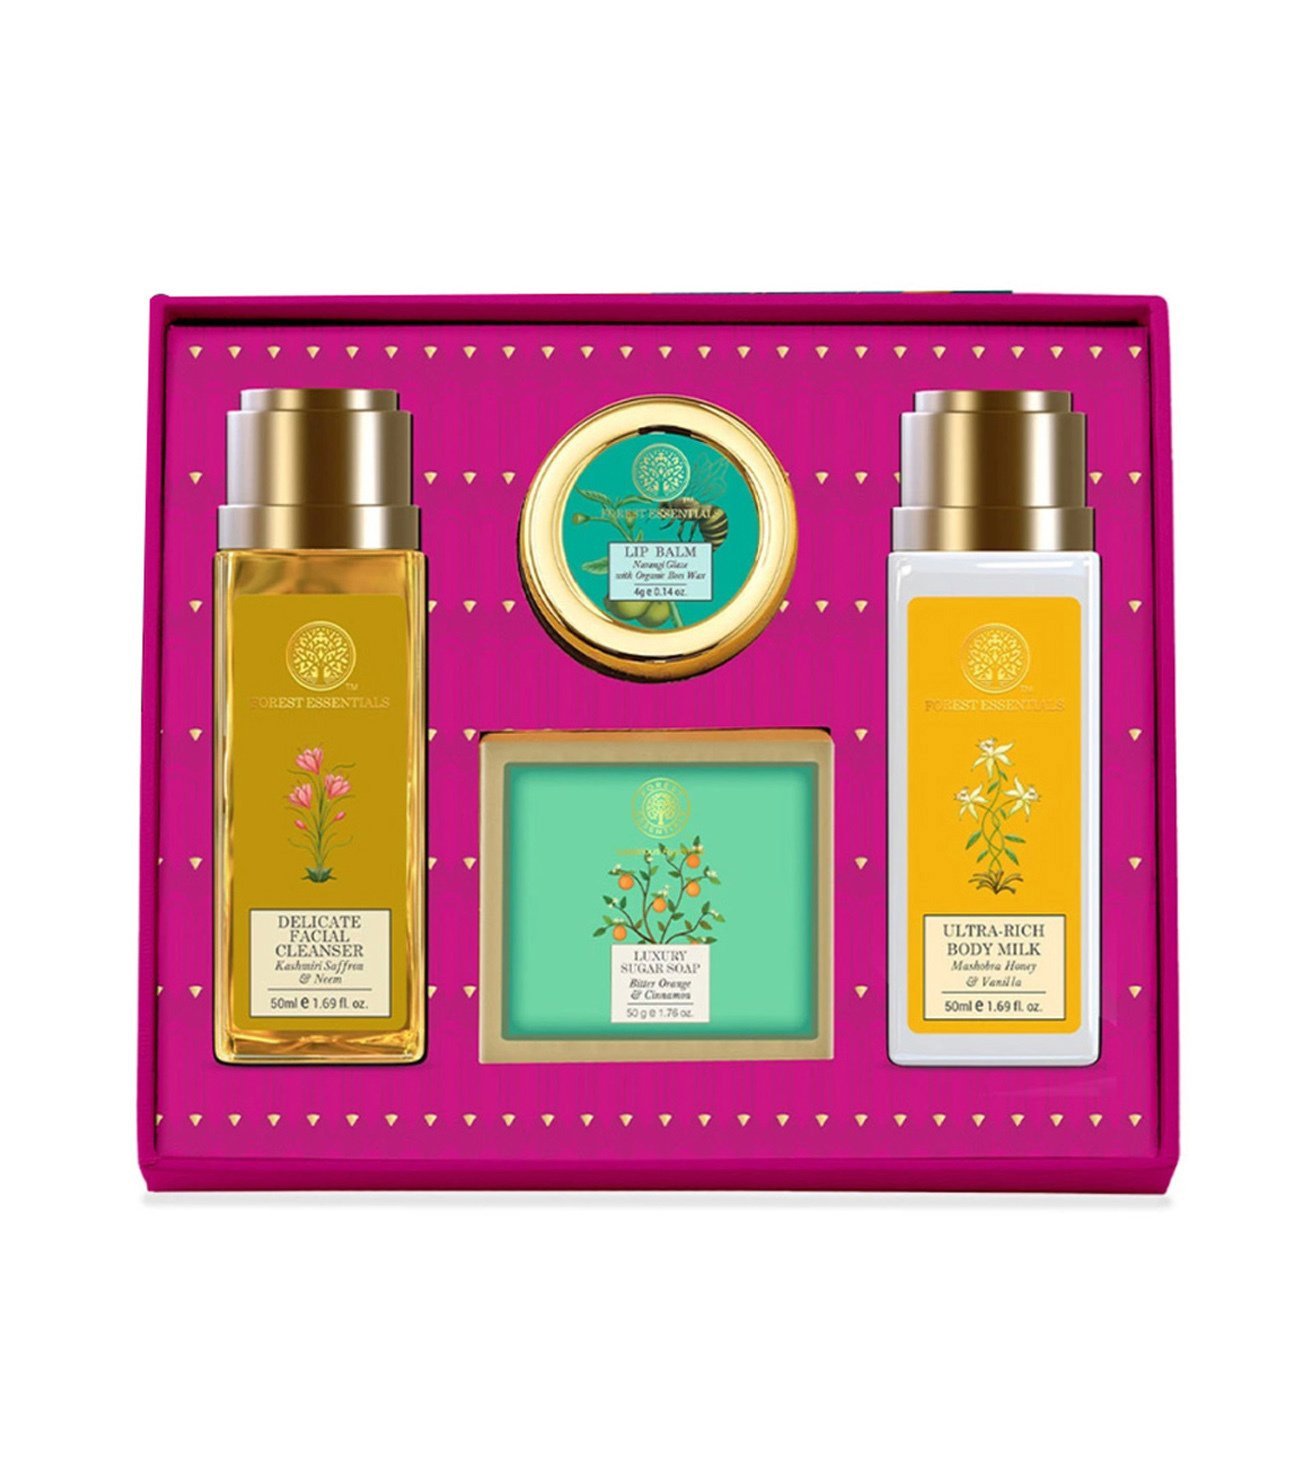 Bestselling Soundarya Miniature Luxury Gift Box by Forest Essentials